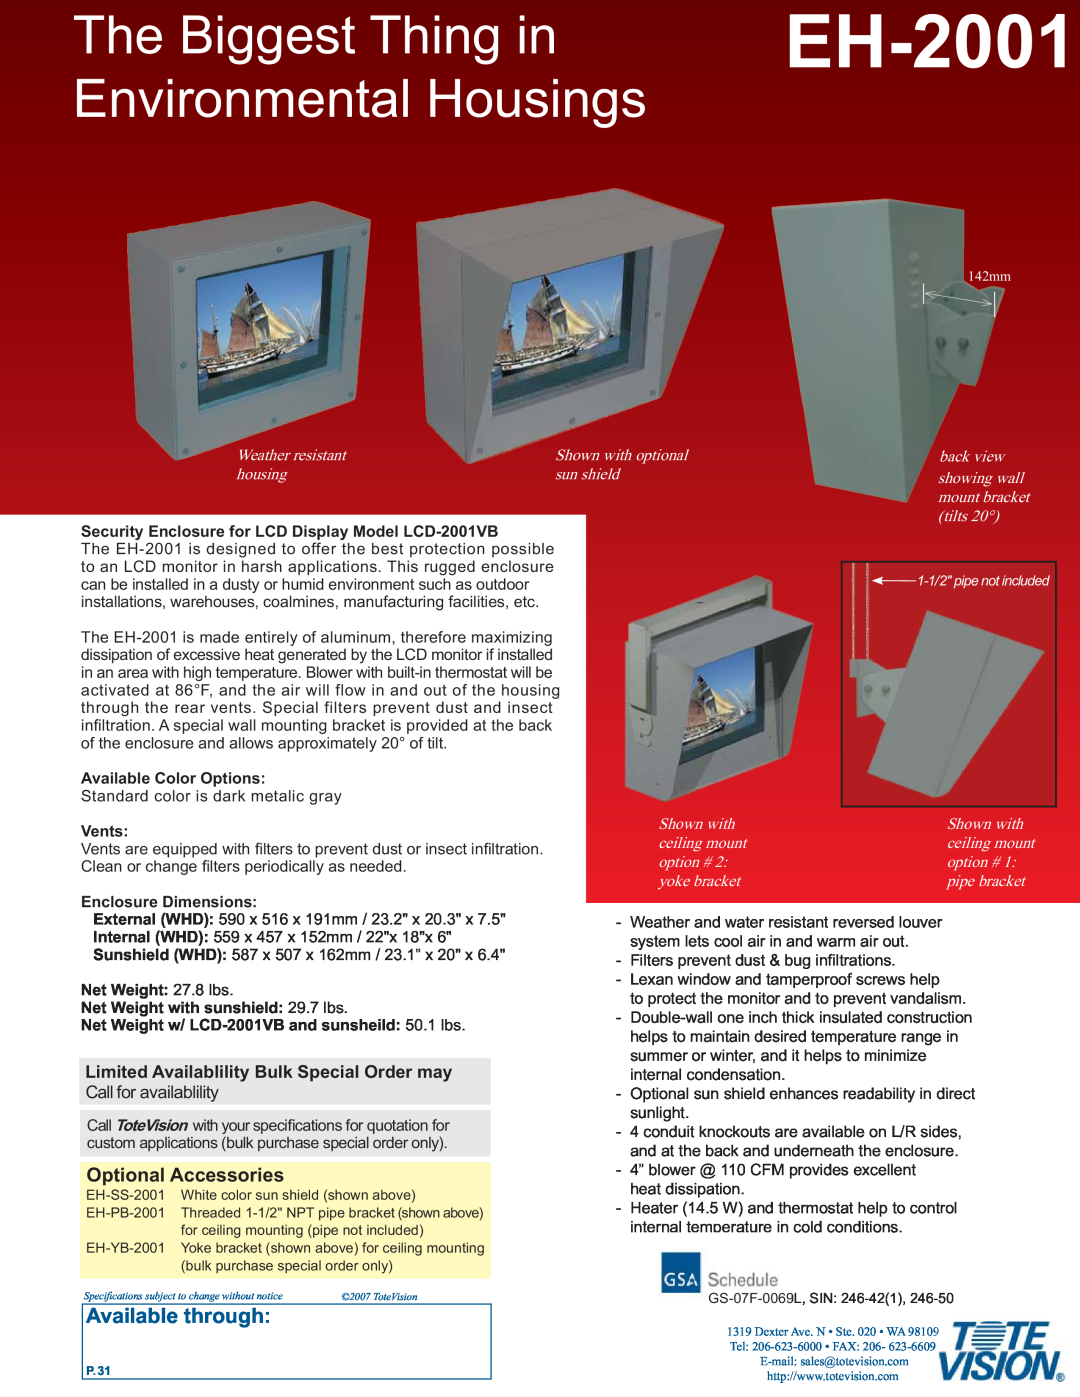 Tote Vision EH-2001 specifications The Biggest Thing in, Environmental Housings, Available through, Optional Accessories 